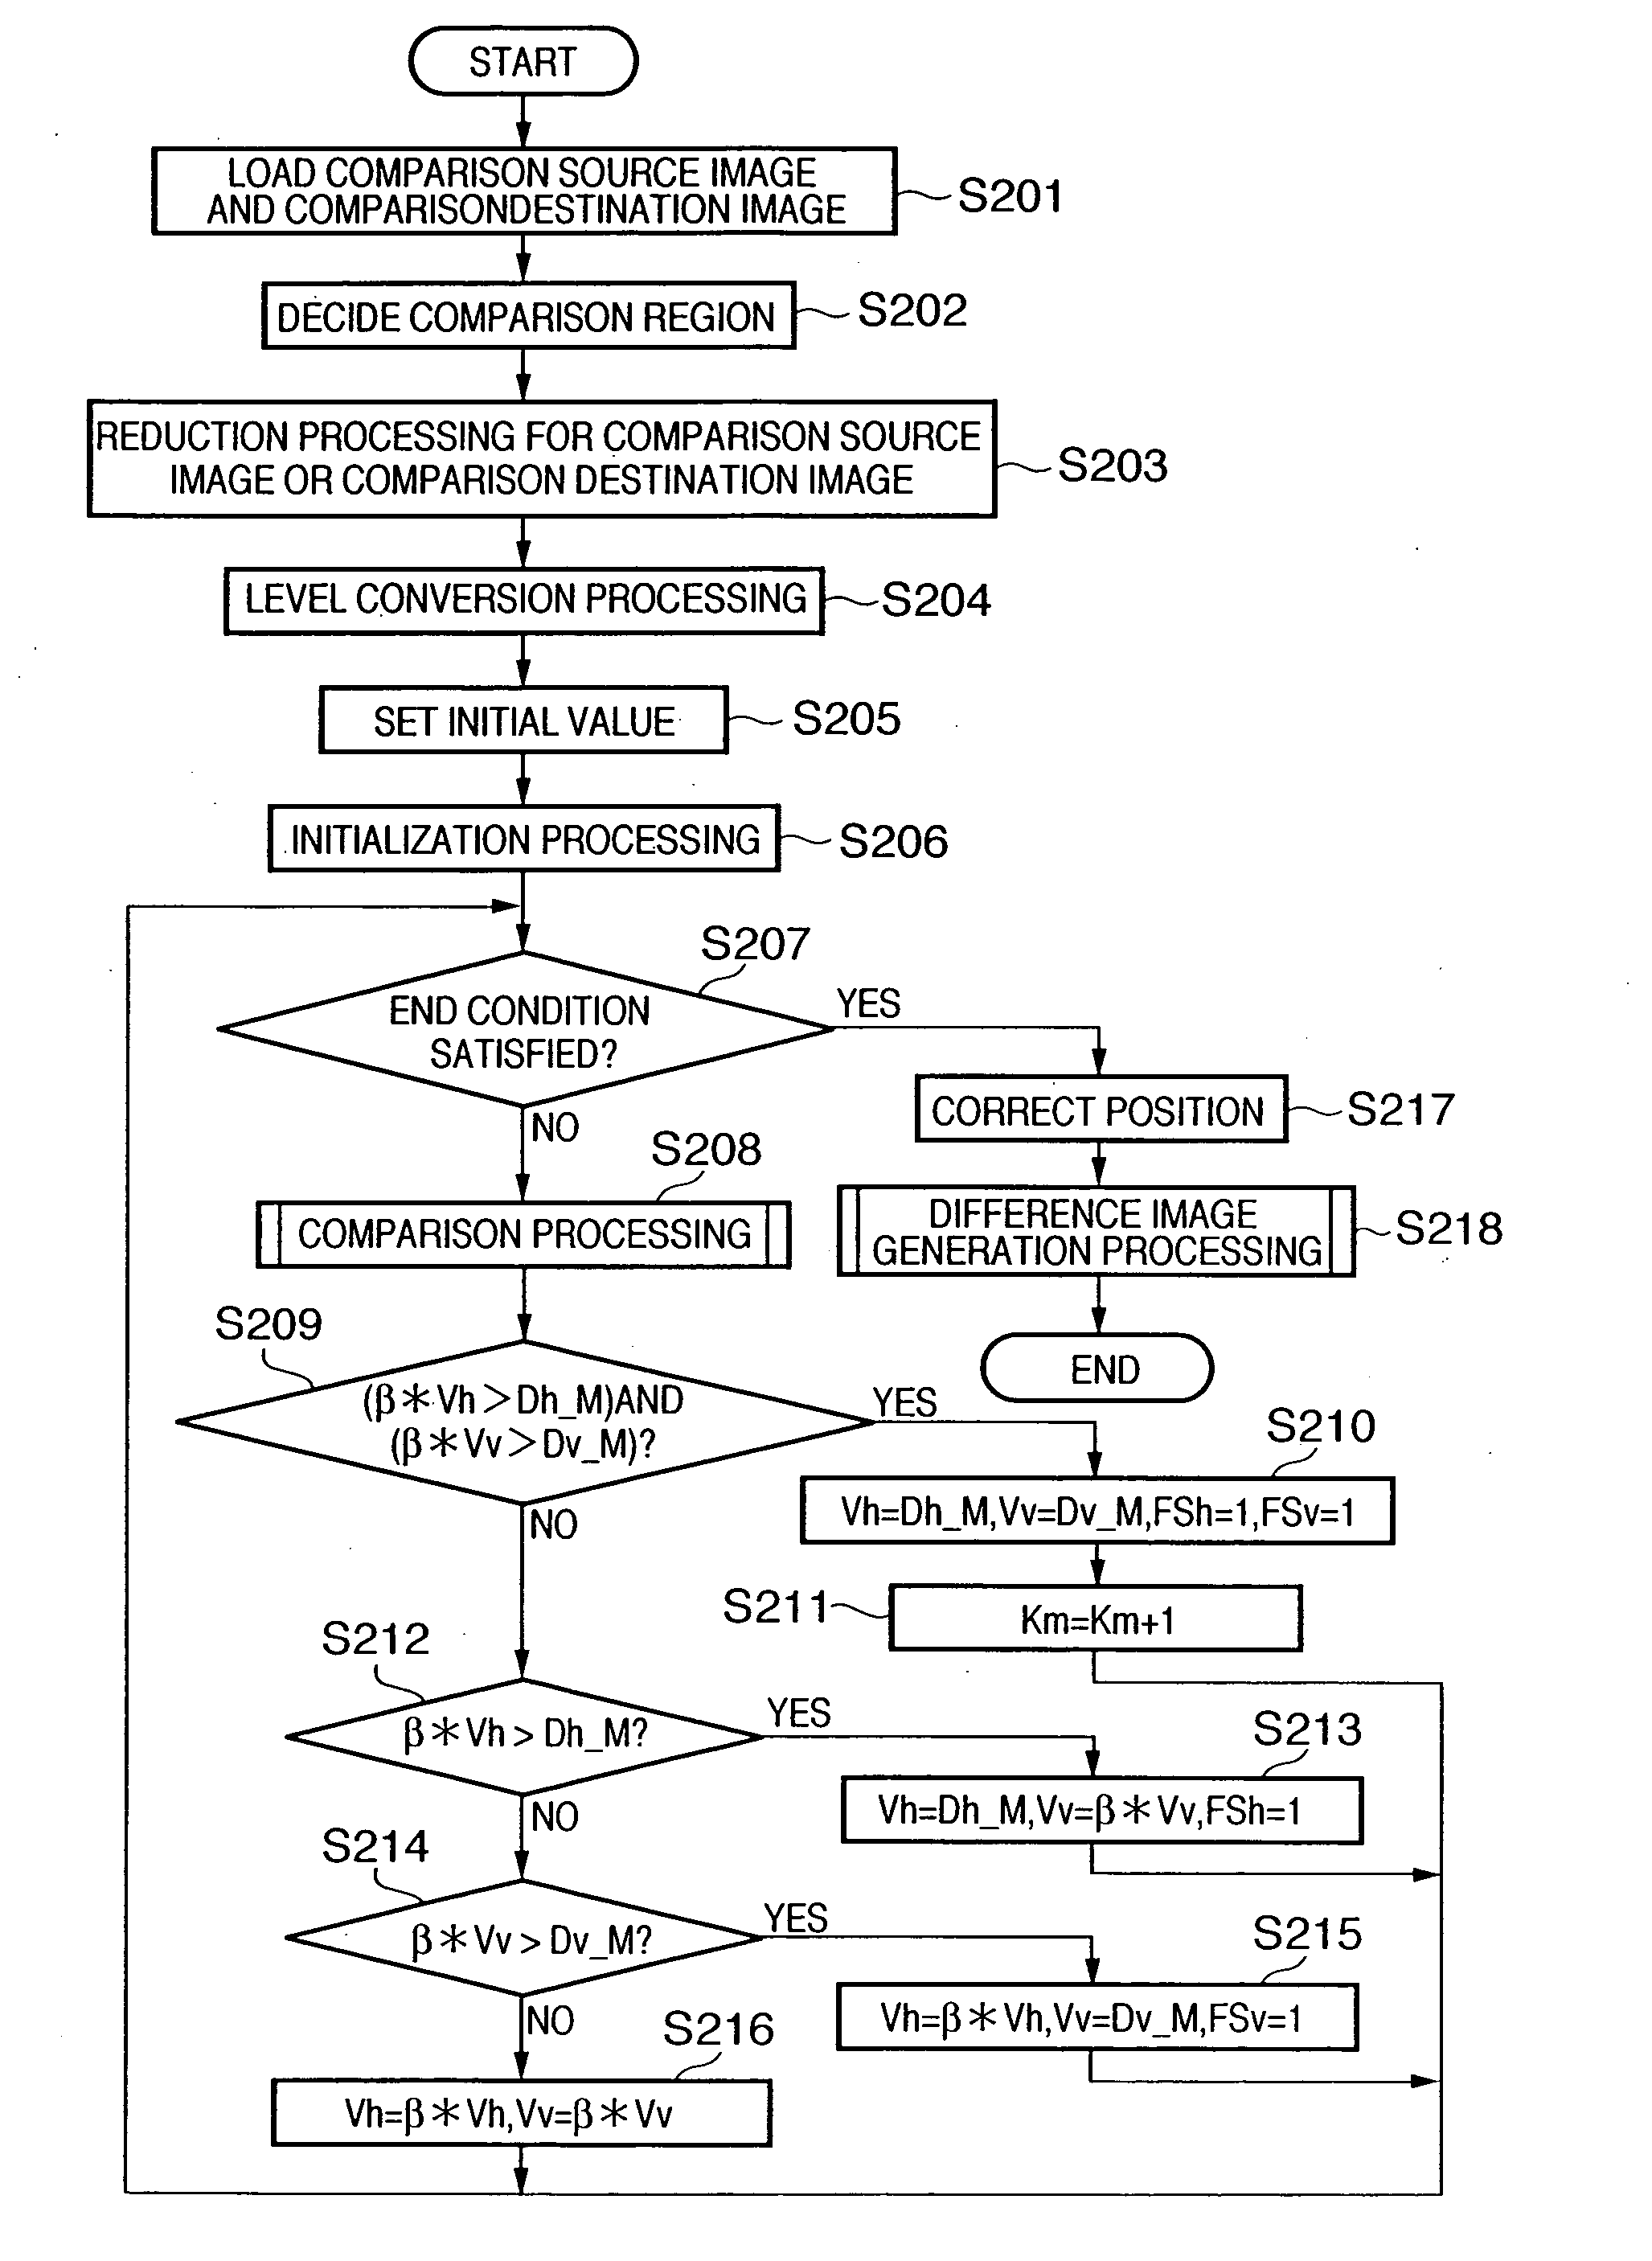 Image processing apparatus, method therefor, and program